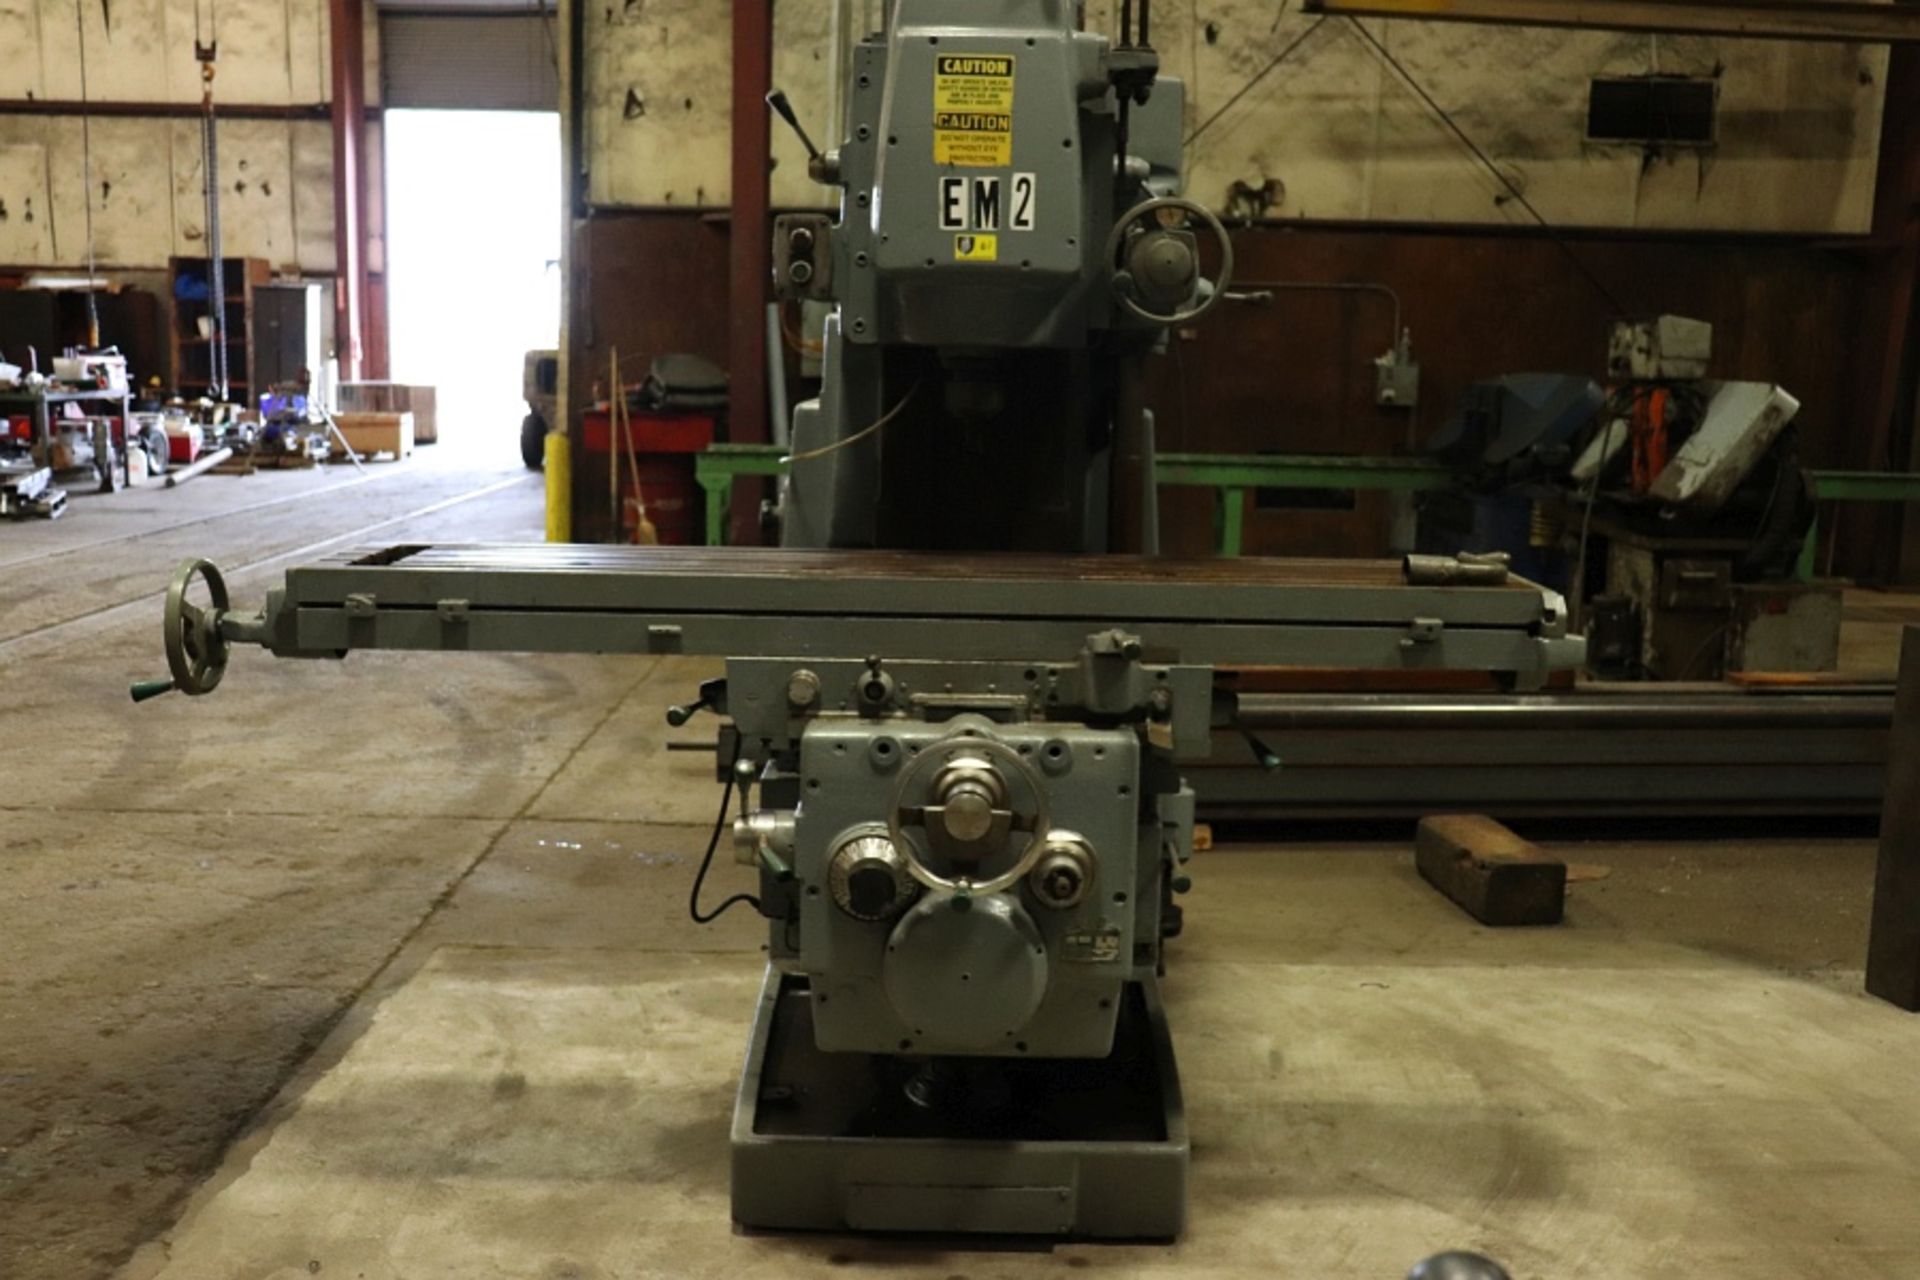 K&T Vertical Mill, Mdl 415-S15, Table 15" x76", 2000 RPM